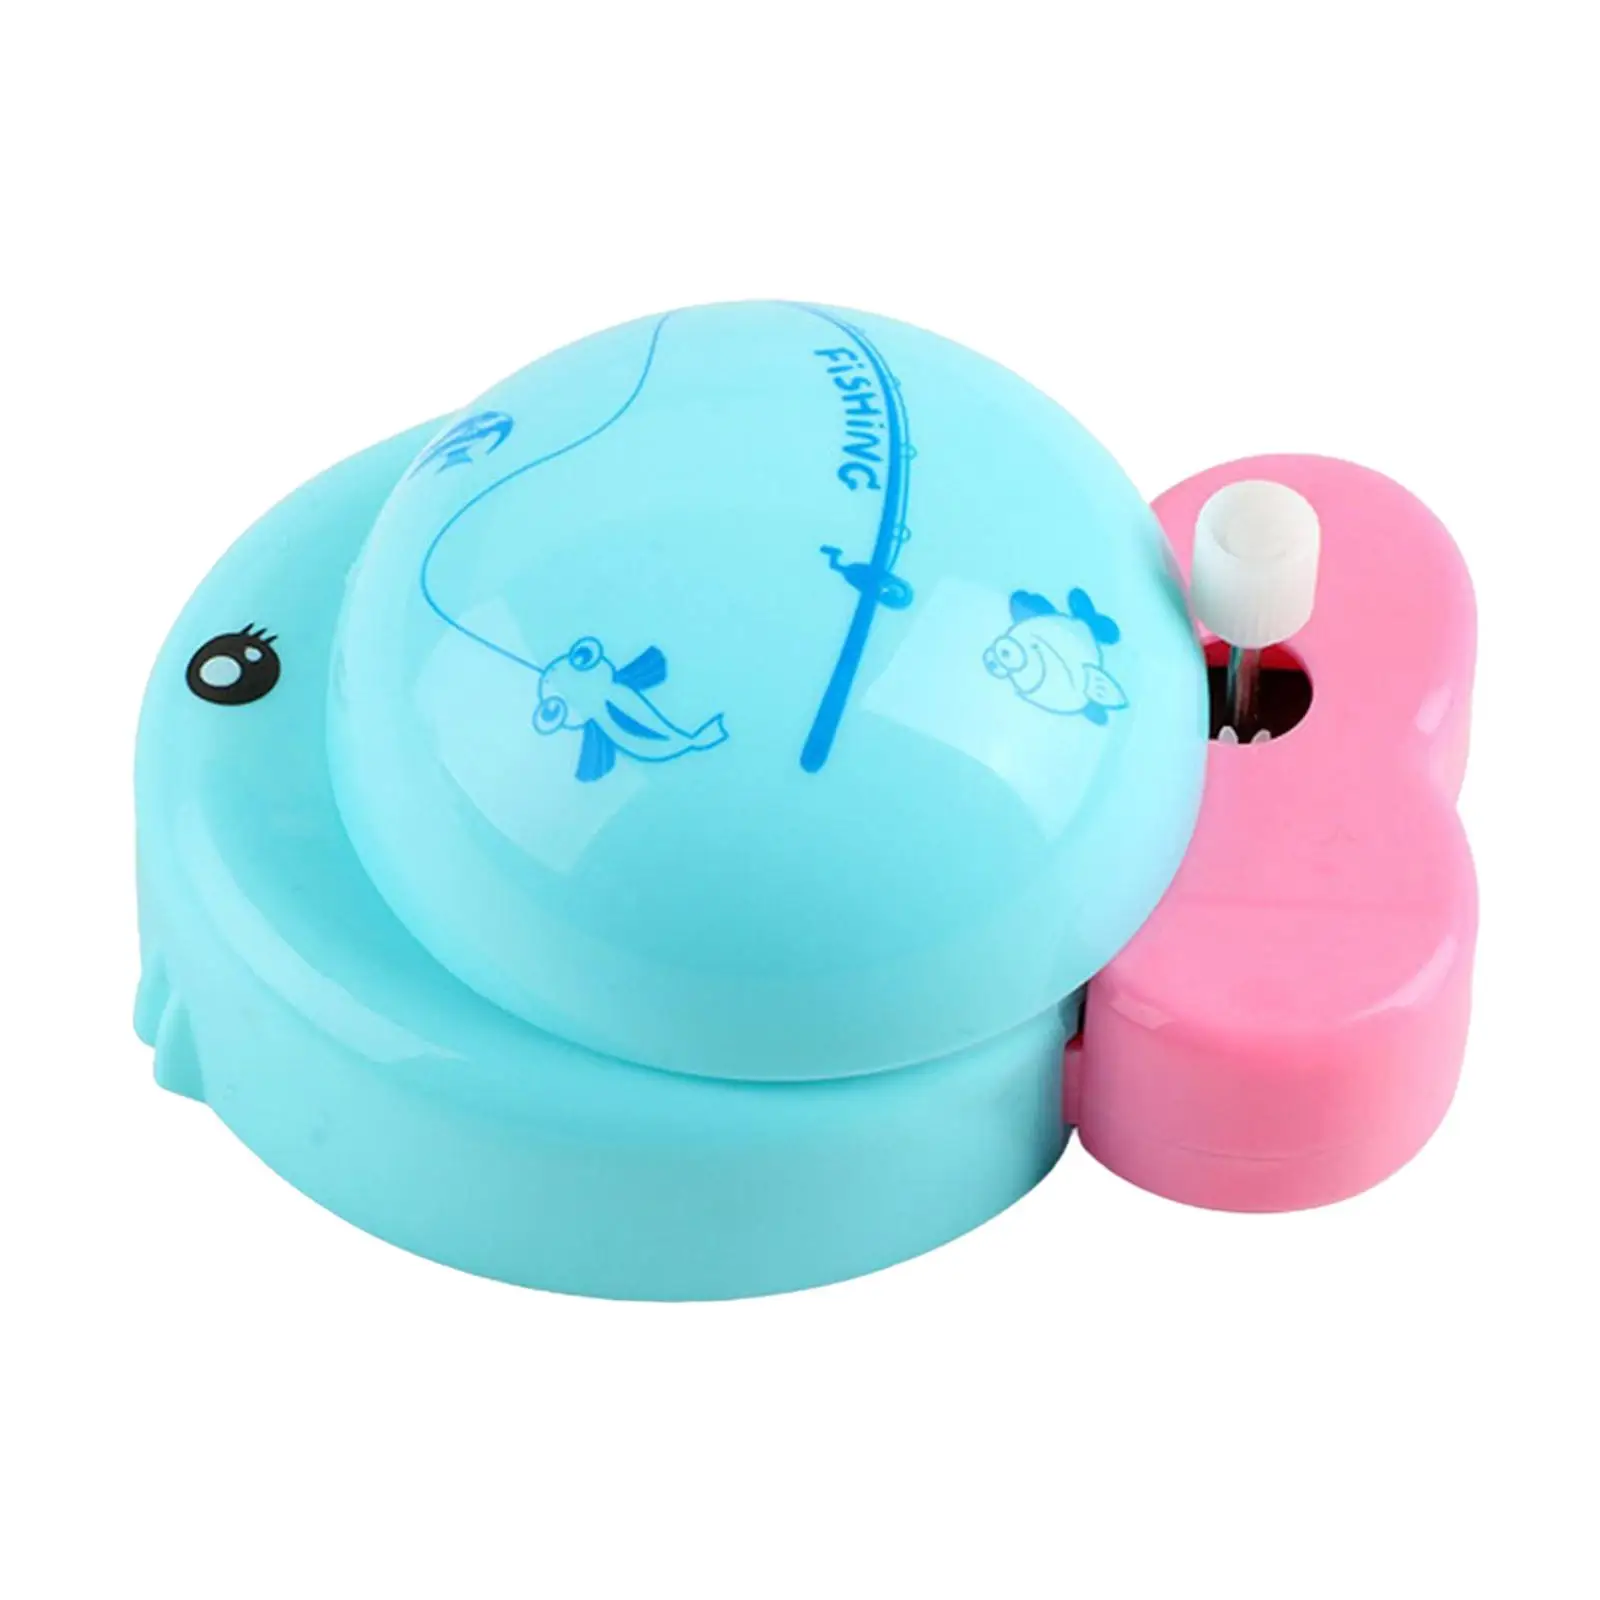 Portable Fishing Game Motor Skills Early Educational Toys Clock Toy for 3 4 5 Year Old Children Kids Birthday Gifts